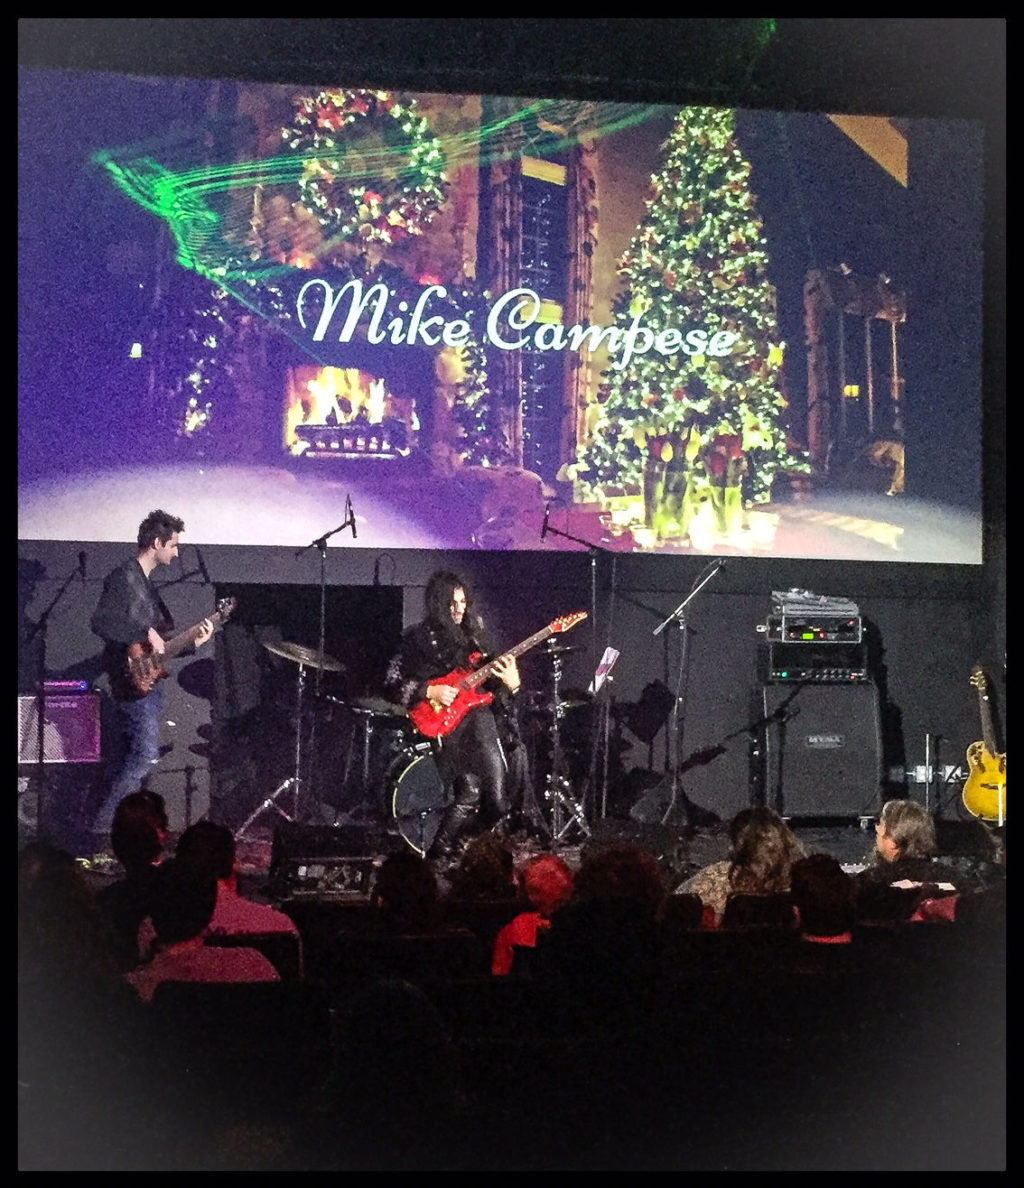 Mike Campese - The Madison Theater, holiday show.